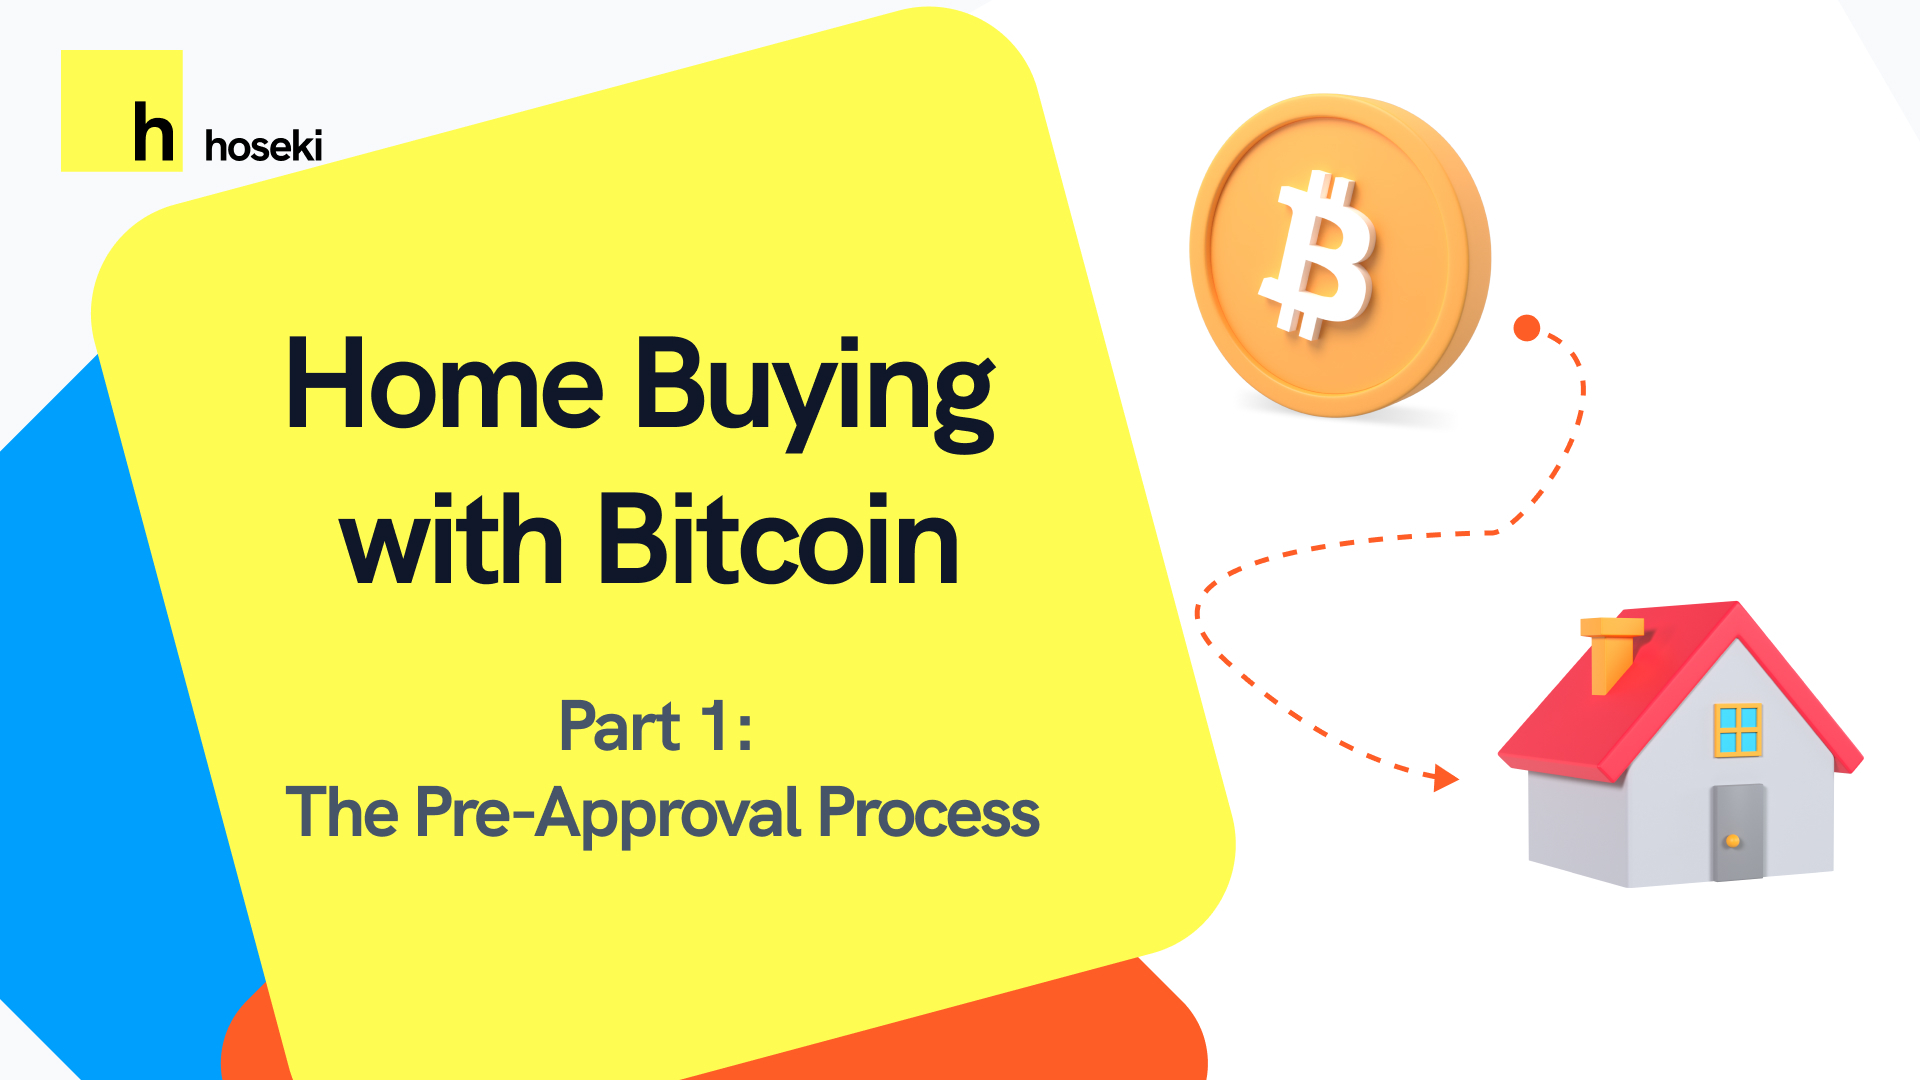 Home Buying with Bitcoin